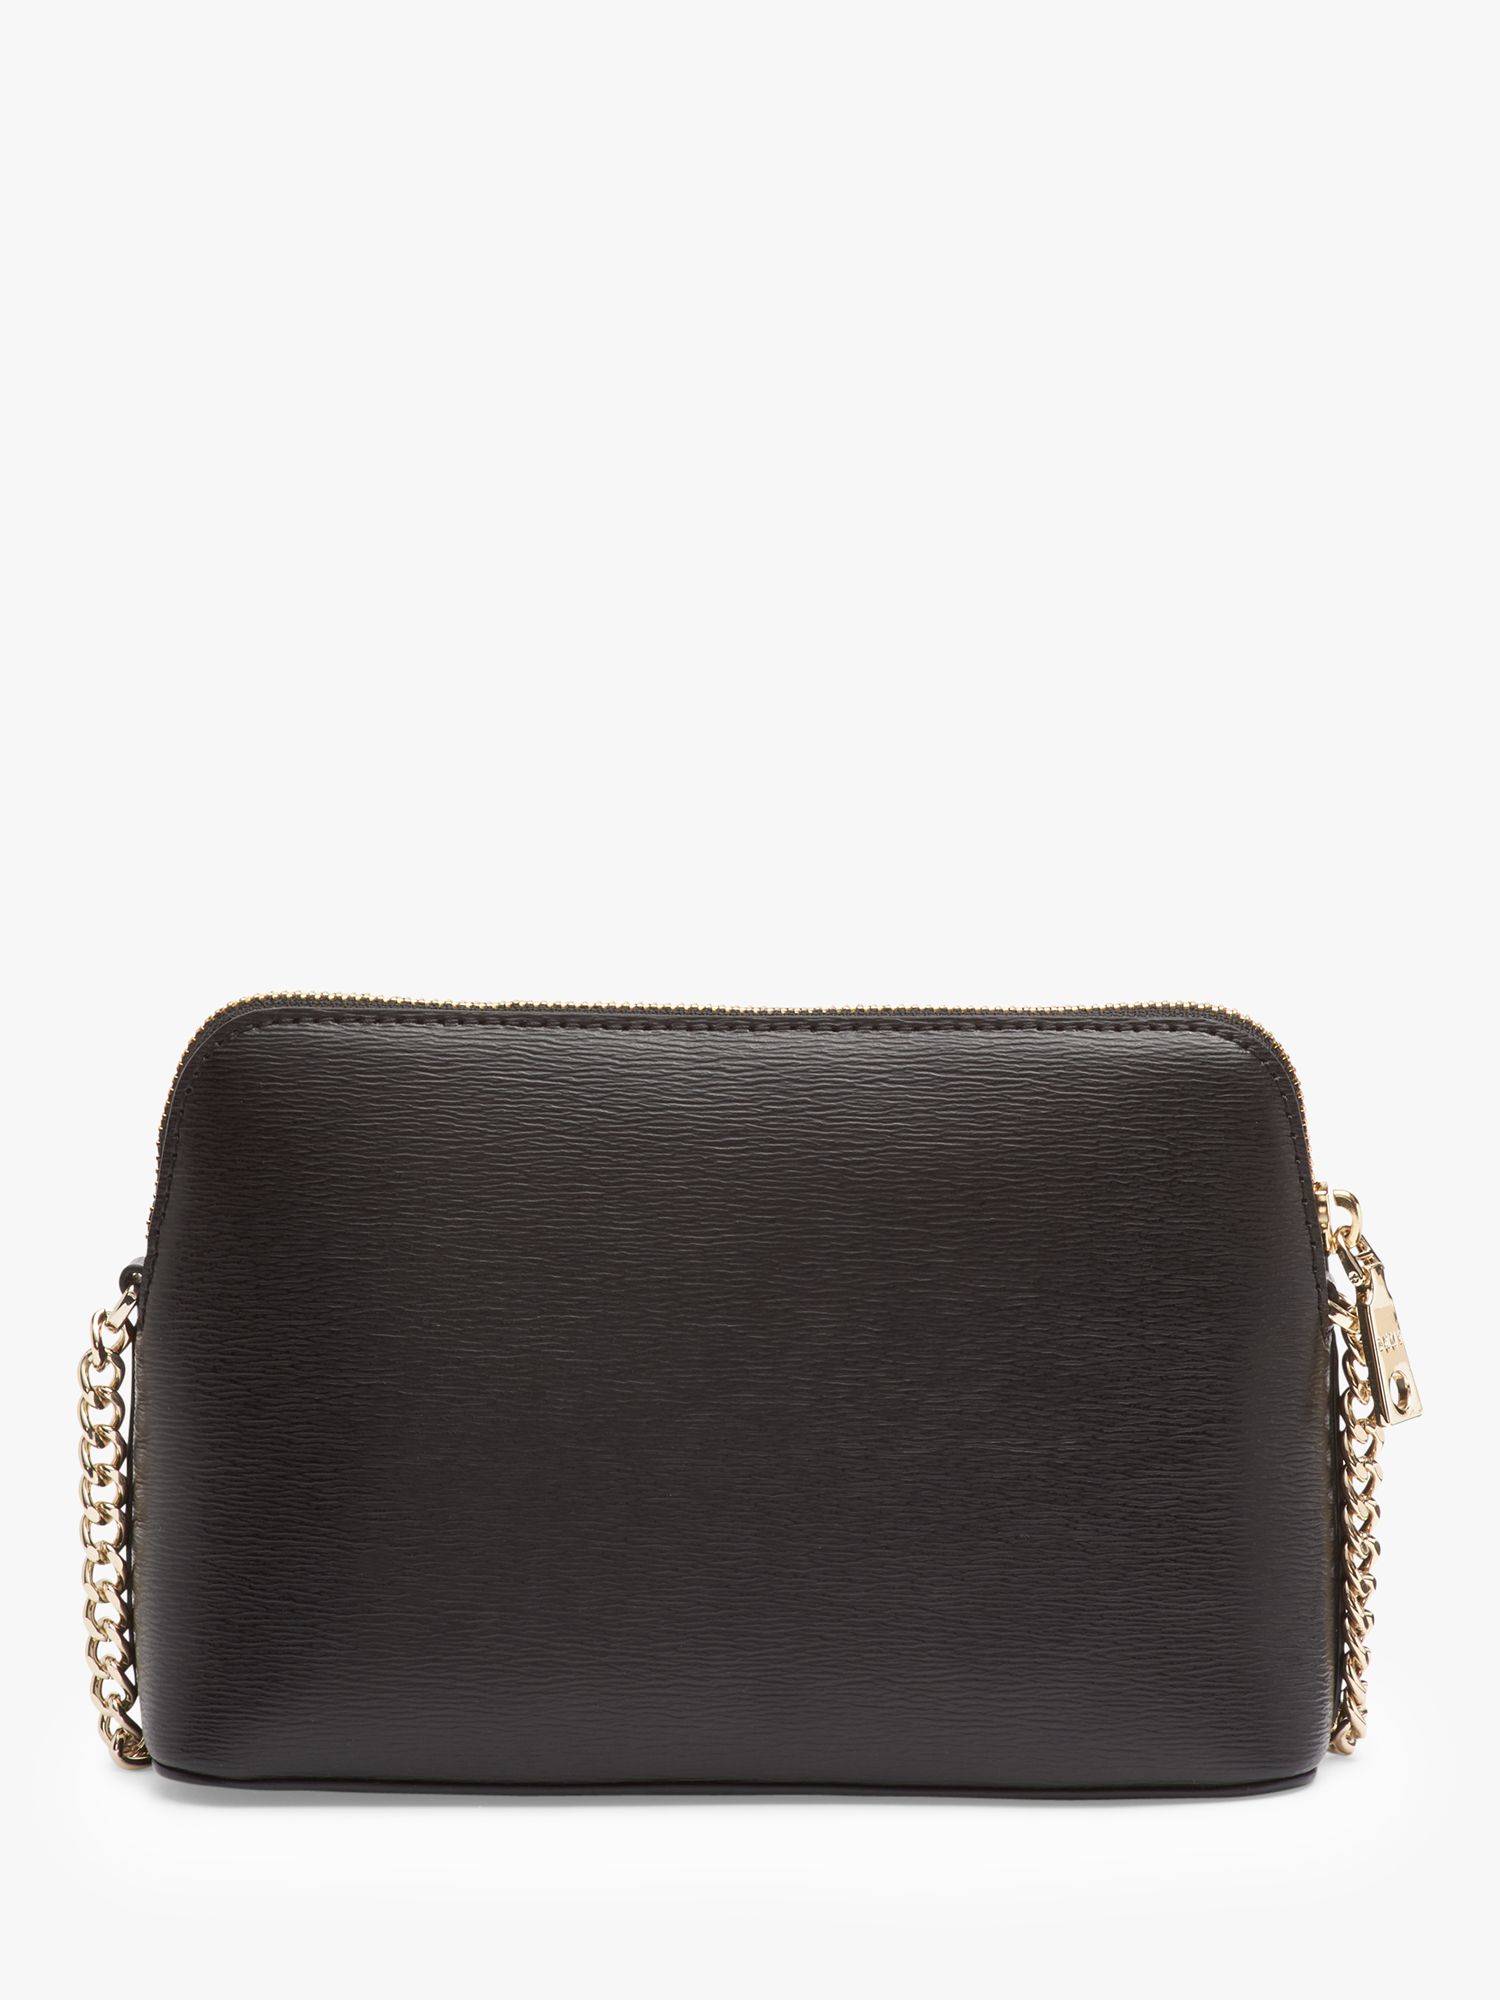 DKNY Bryant Dome Leather Cross Body Bag, Black at John Lewis & Partners